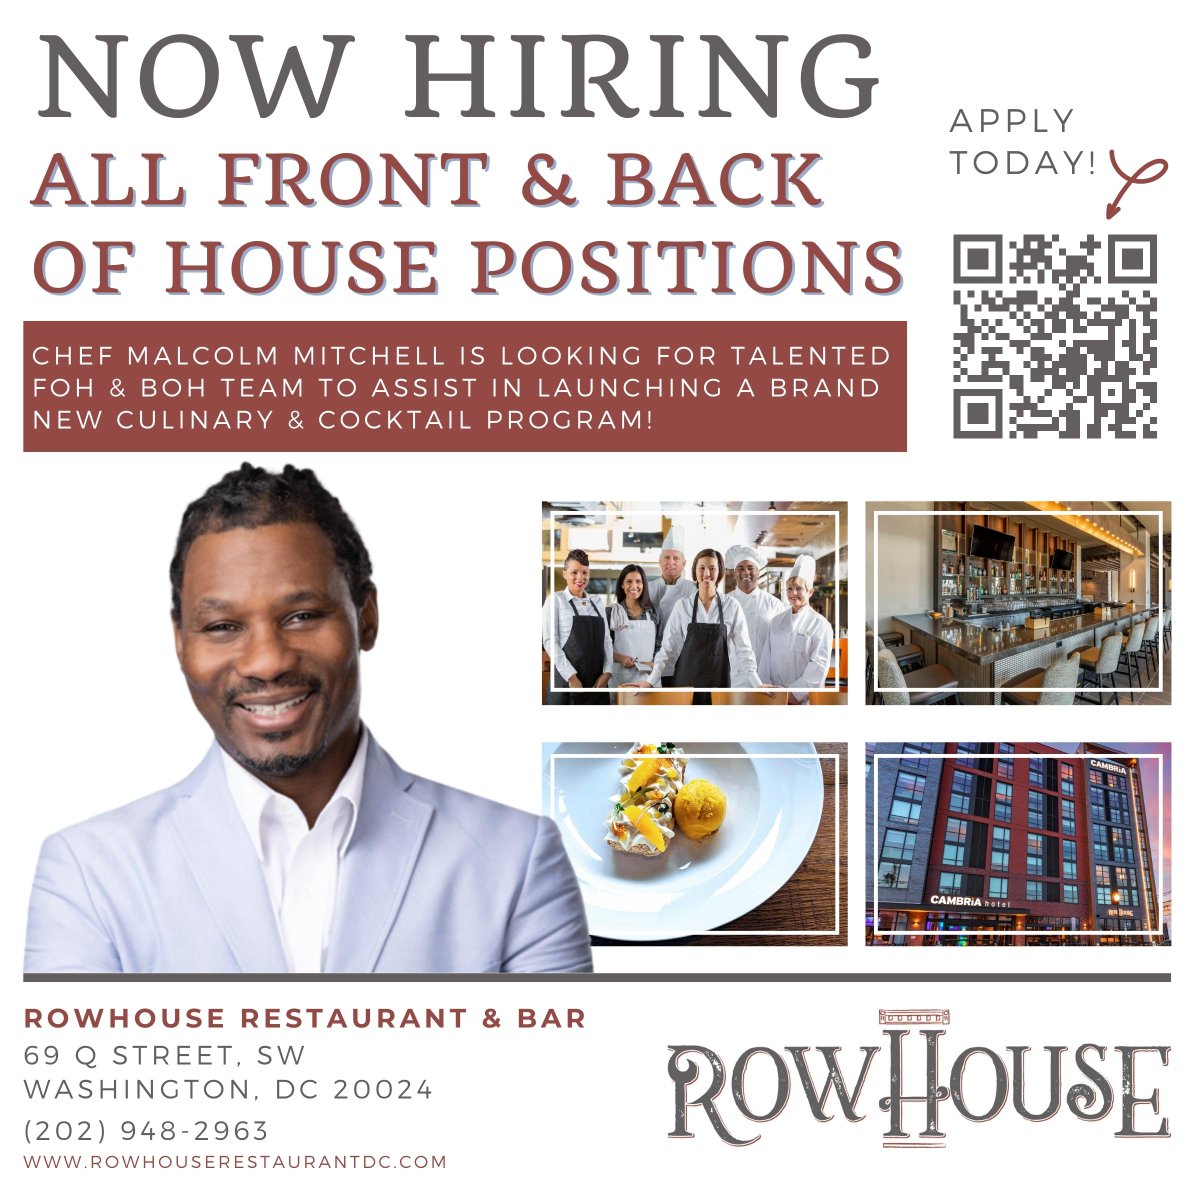 We are currently seeking to hire front-of-house (FOH) and back-of-house (BOH) staff for the RowHouse Restaurant & Bar located within our Cambria Capitol Riverfront Hotel in #WashingtonDC. #ApplyToday @ tinyurl.com/RowHouseFnB #HospitalityJobs #NowHiring #DMVjobs